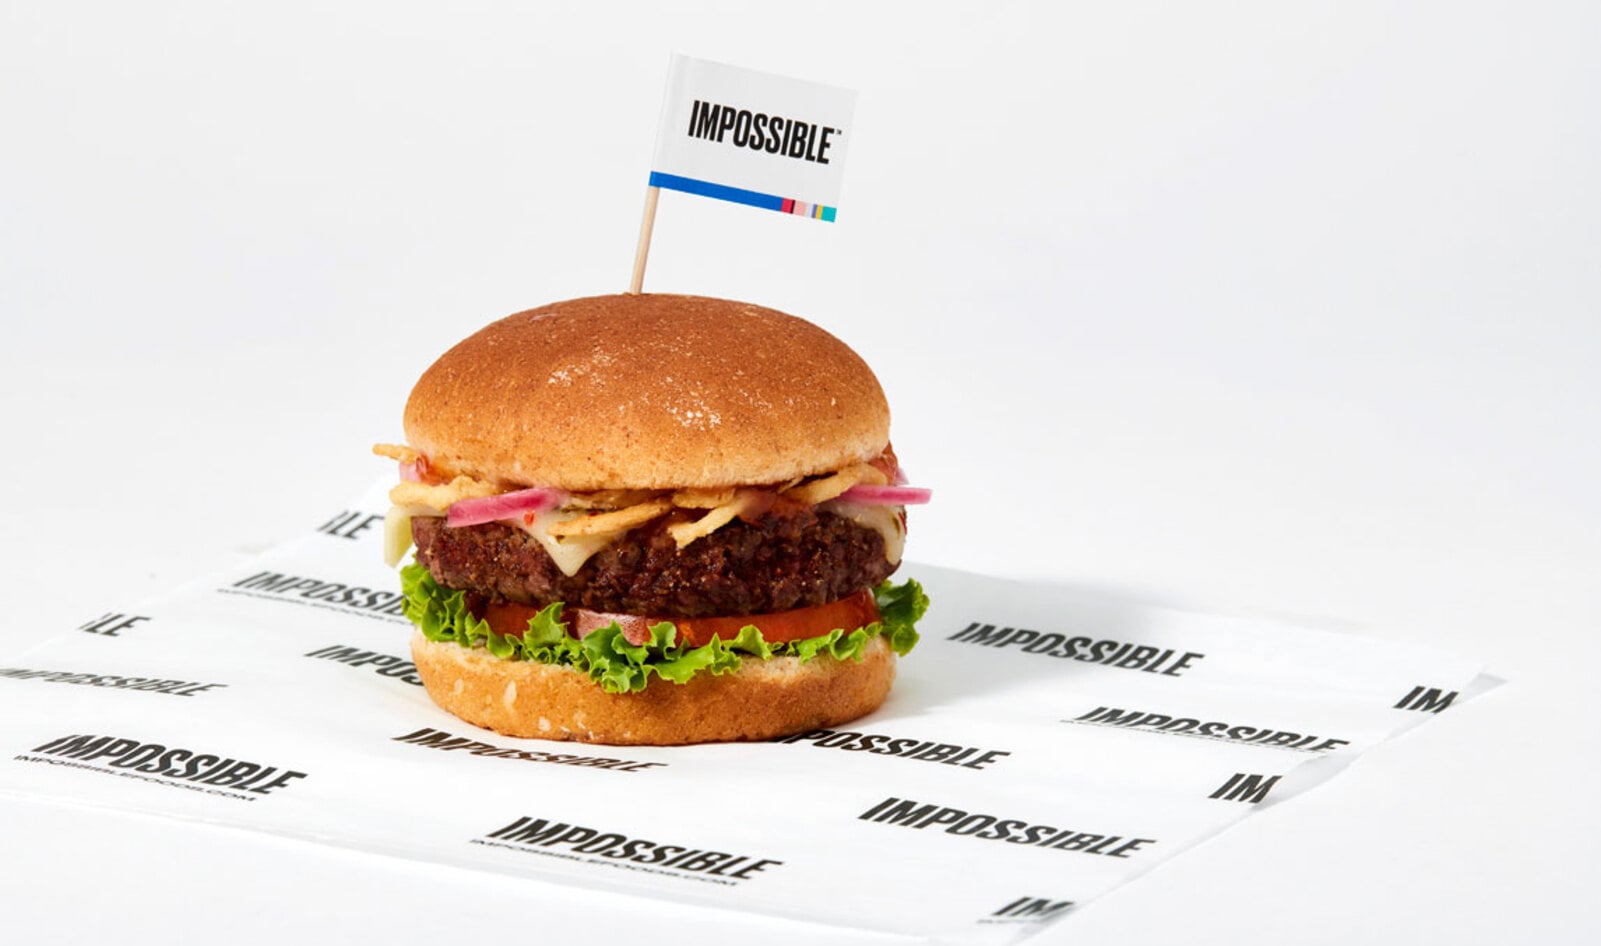 Sodexo Brings Plant-Based Impossible Burger to 1,500 Colleges, Hospitals, and Cafeterias Nationwide&nbsp;